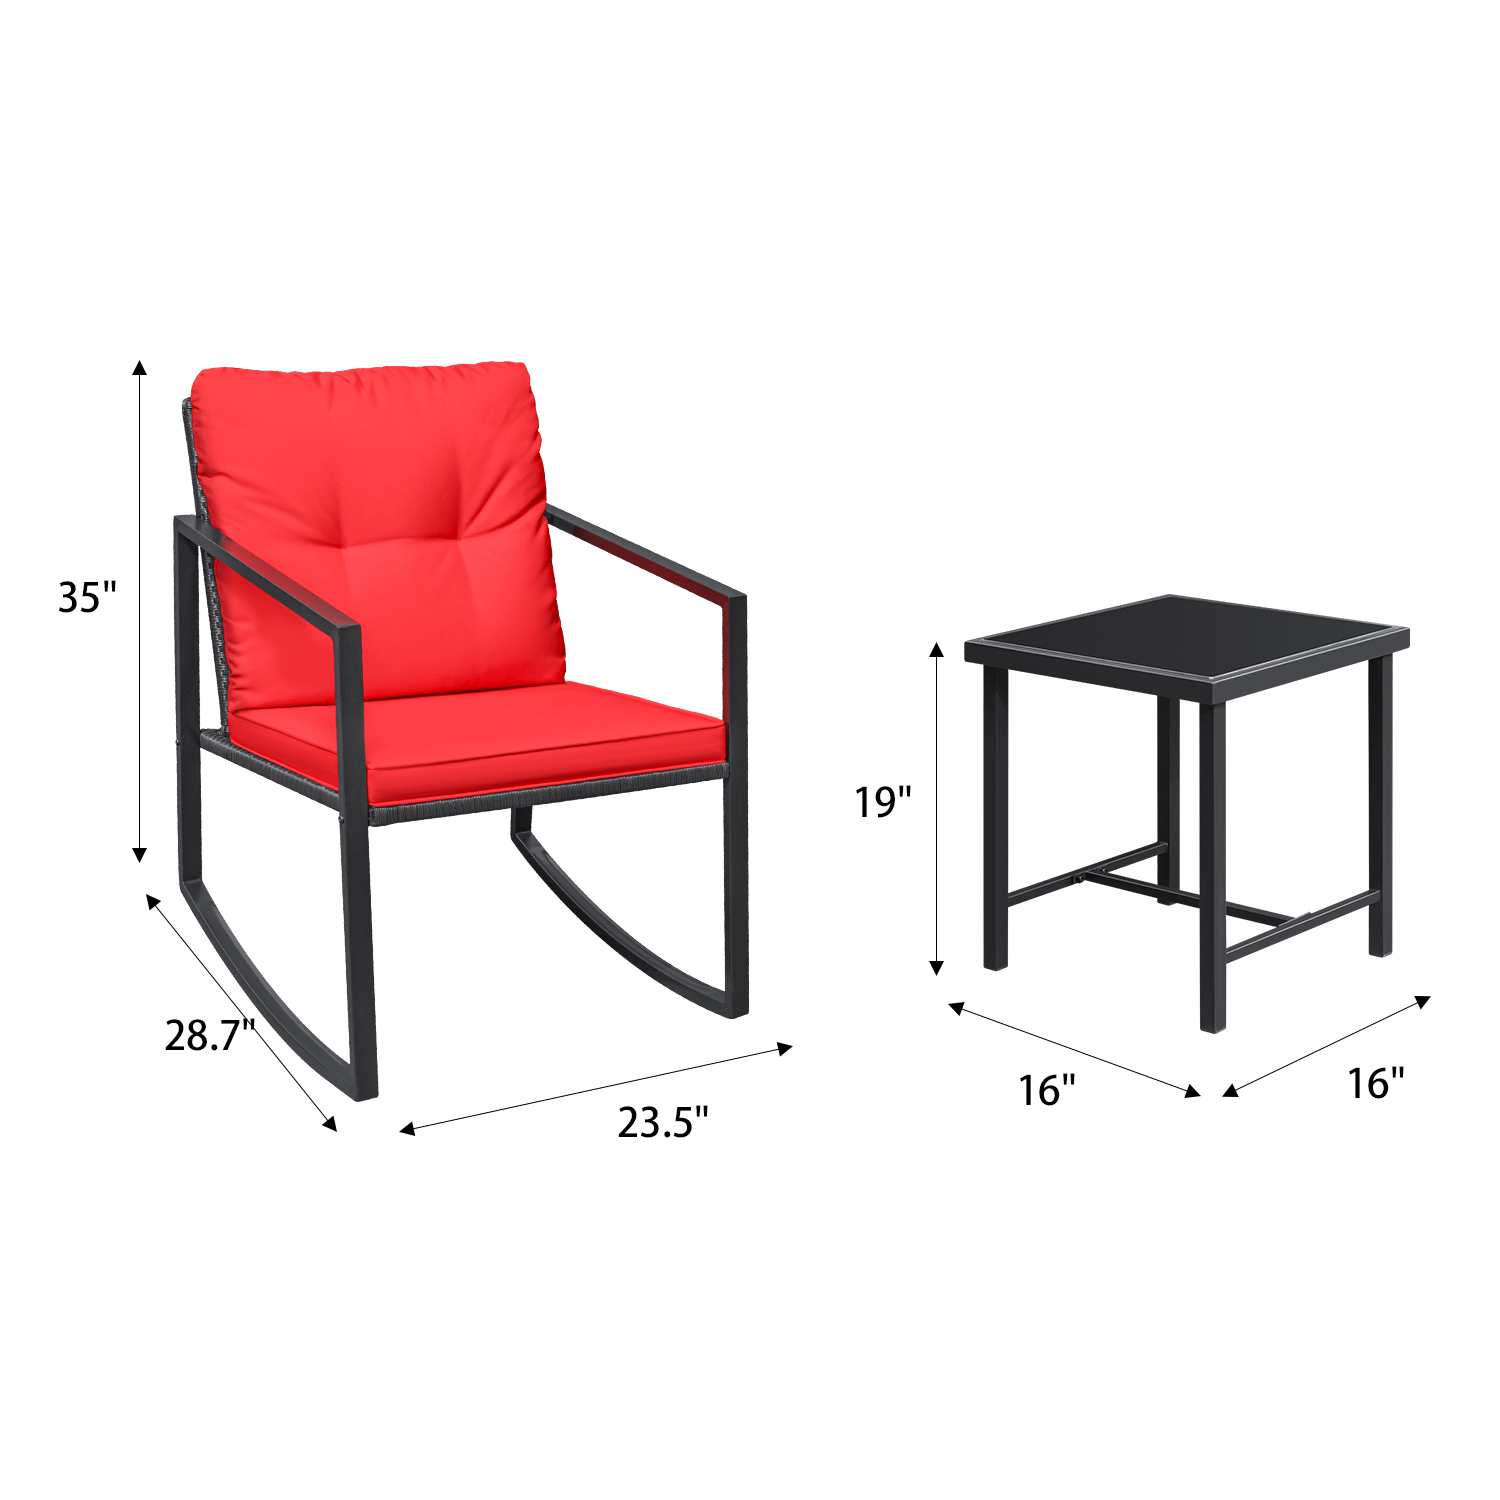 Lacoo 3 Pieces Patio Furniture Set Rocking Wicker Bistro Sets Modern Outdoor Rocking Chair Furniture Sets Cushioned PE Rattan Chairs Conversation Sets with Glass Coffee Table (Red) - image 3 of 7